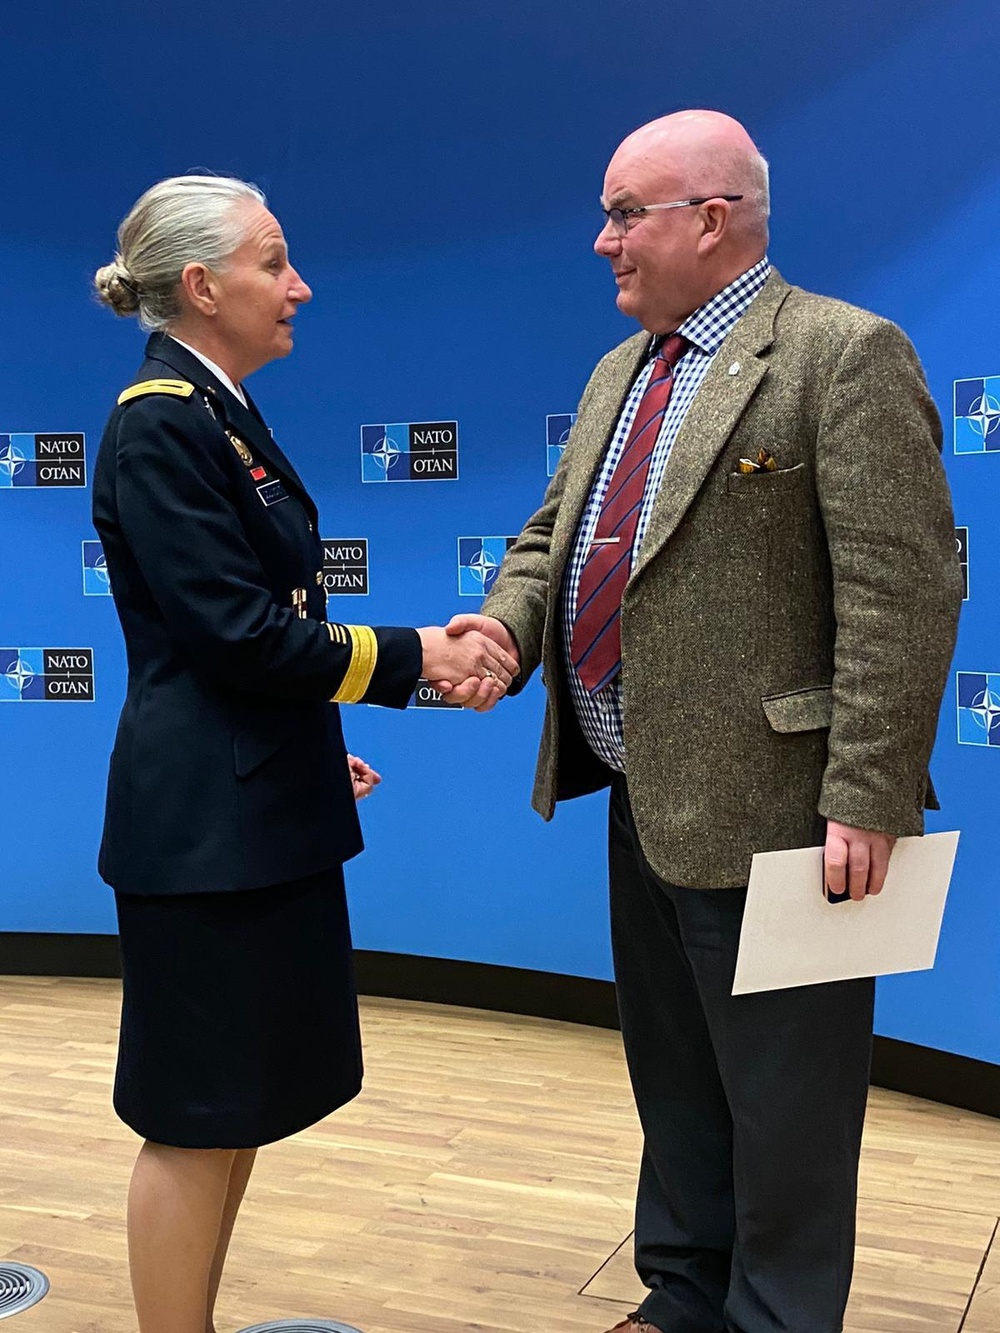 NATO Partners Come Together Again to Discuss Global Medical Challenges